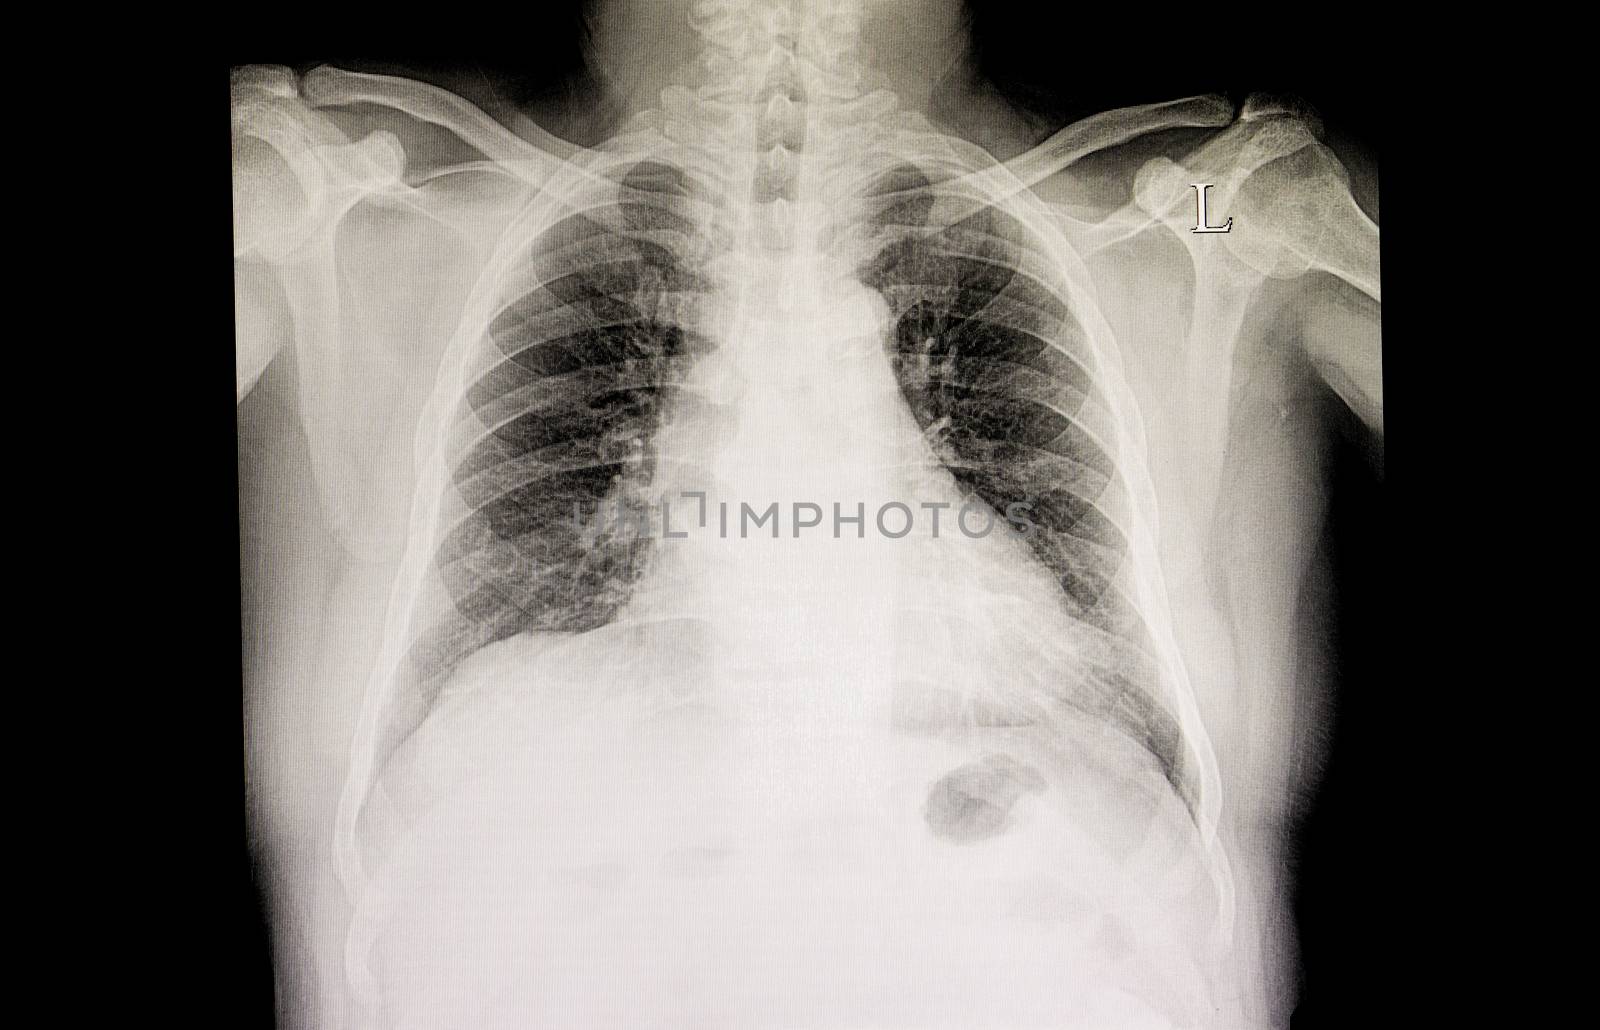 A chest xray film of a patient with cardiomegaly and early lung congestion